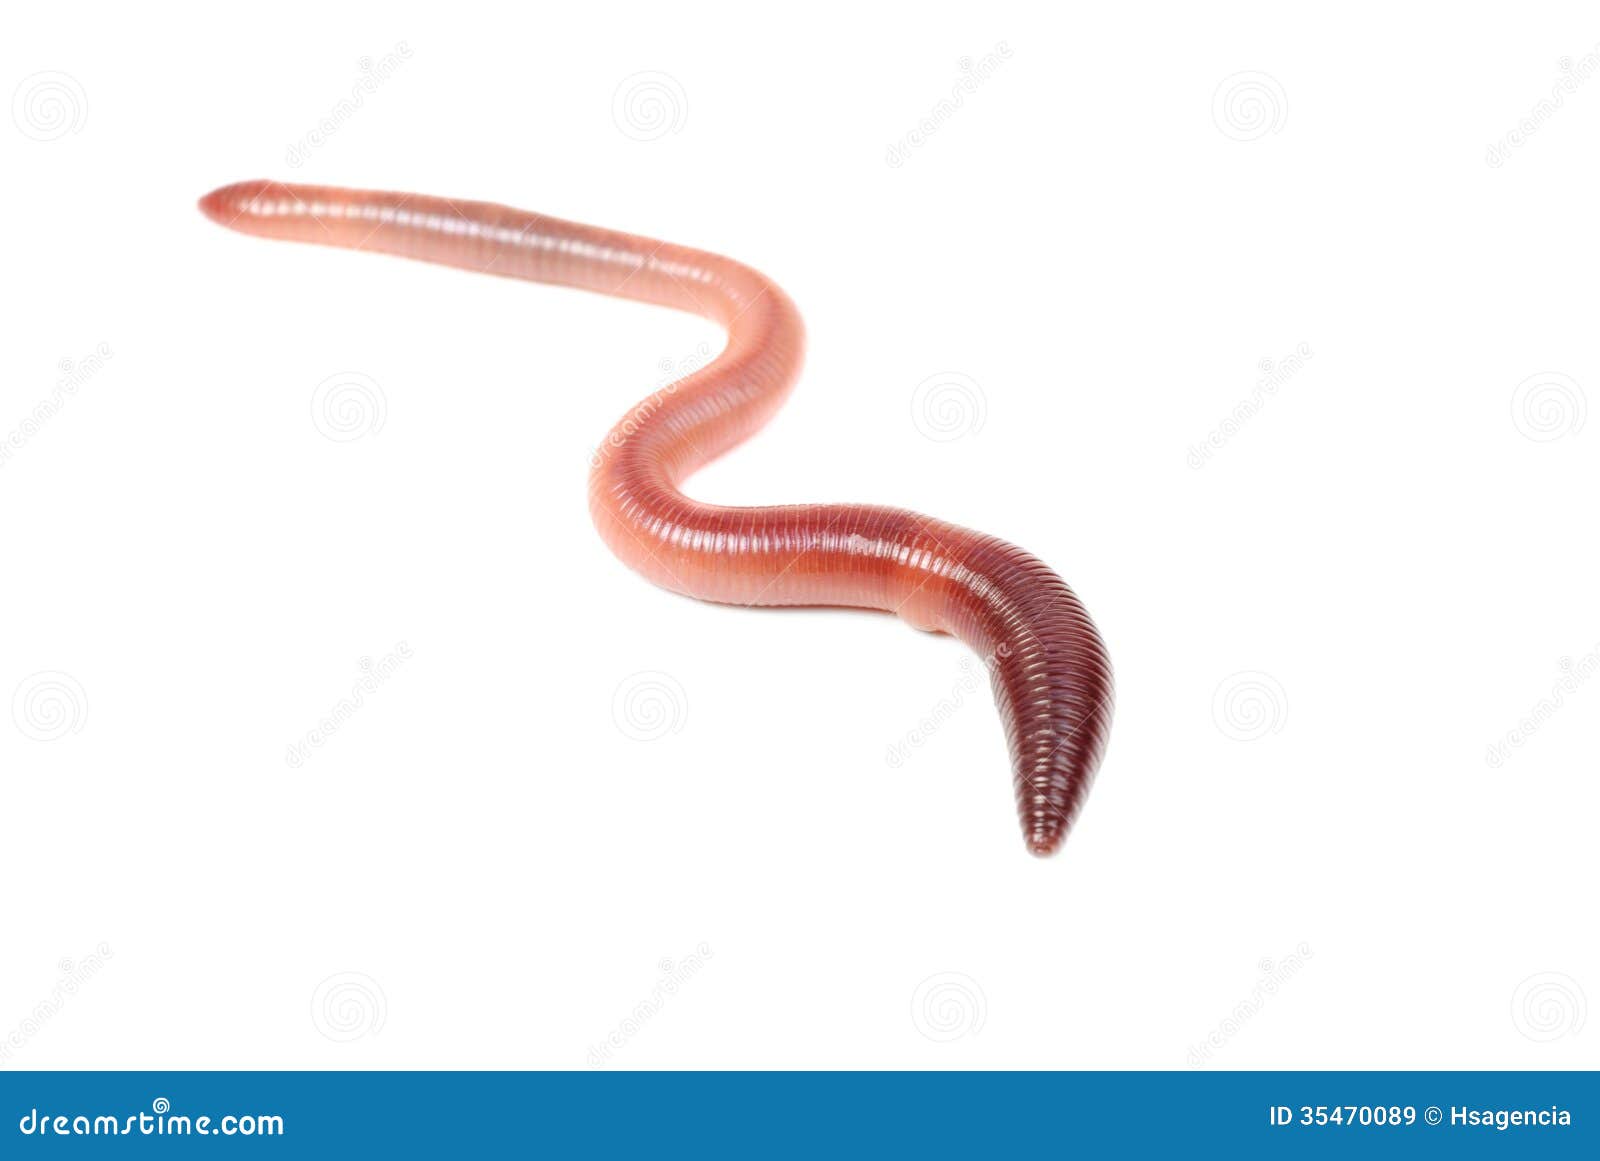 animal earth worm  on white